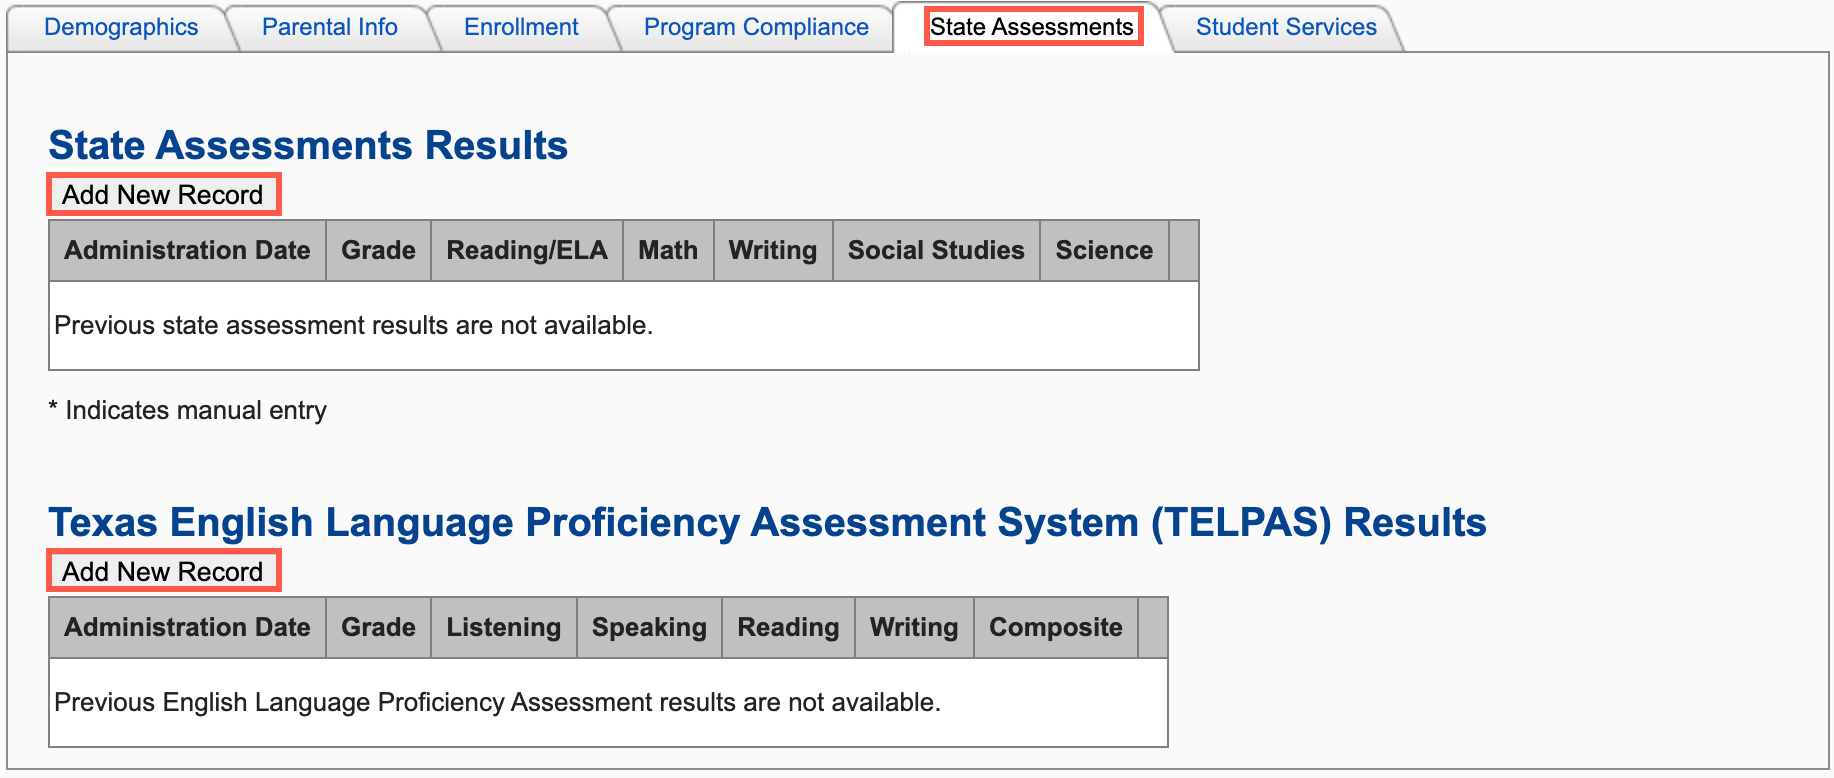 assessments tab.png